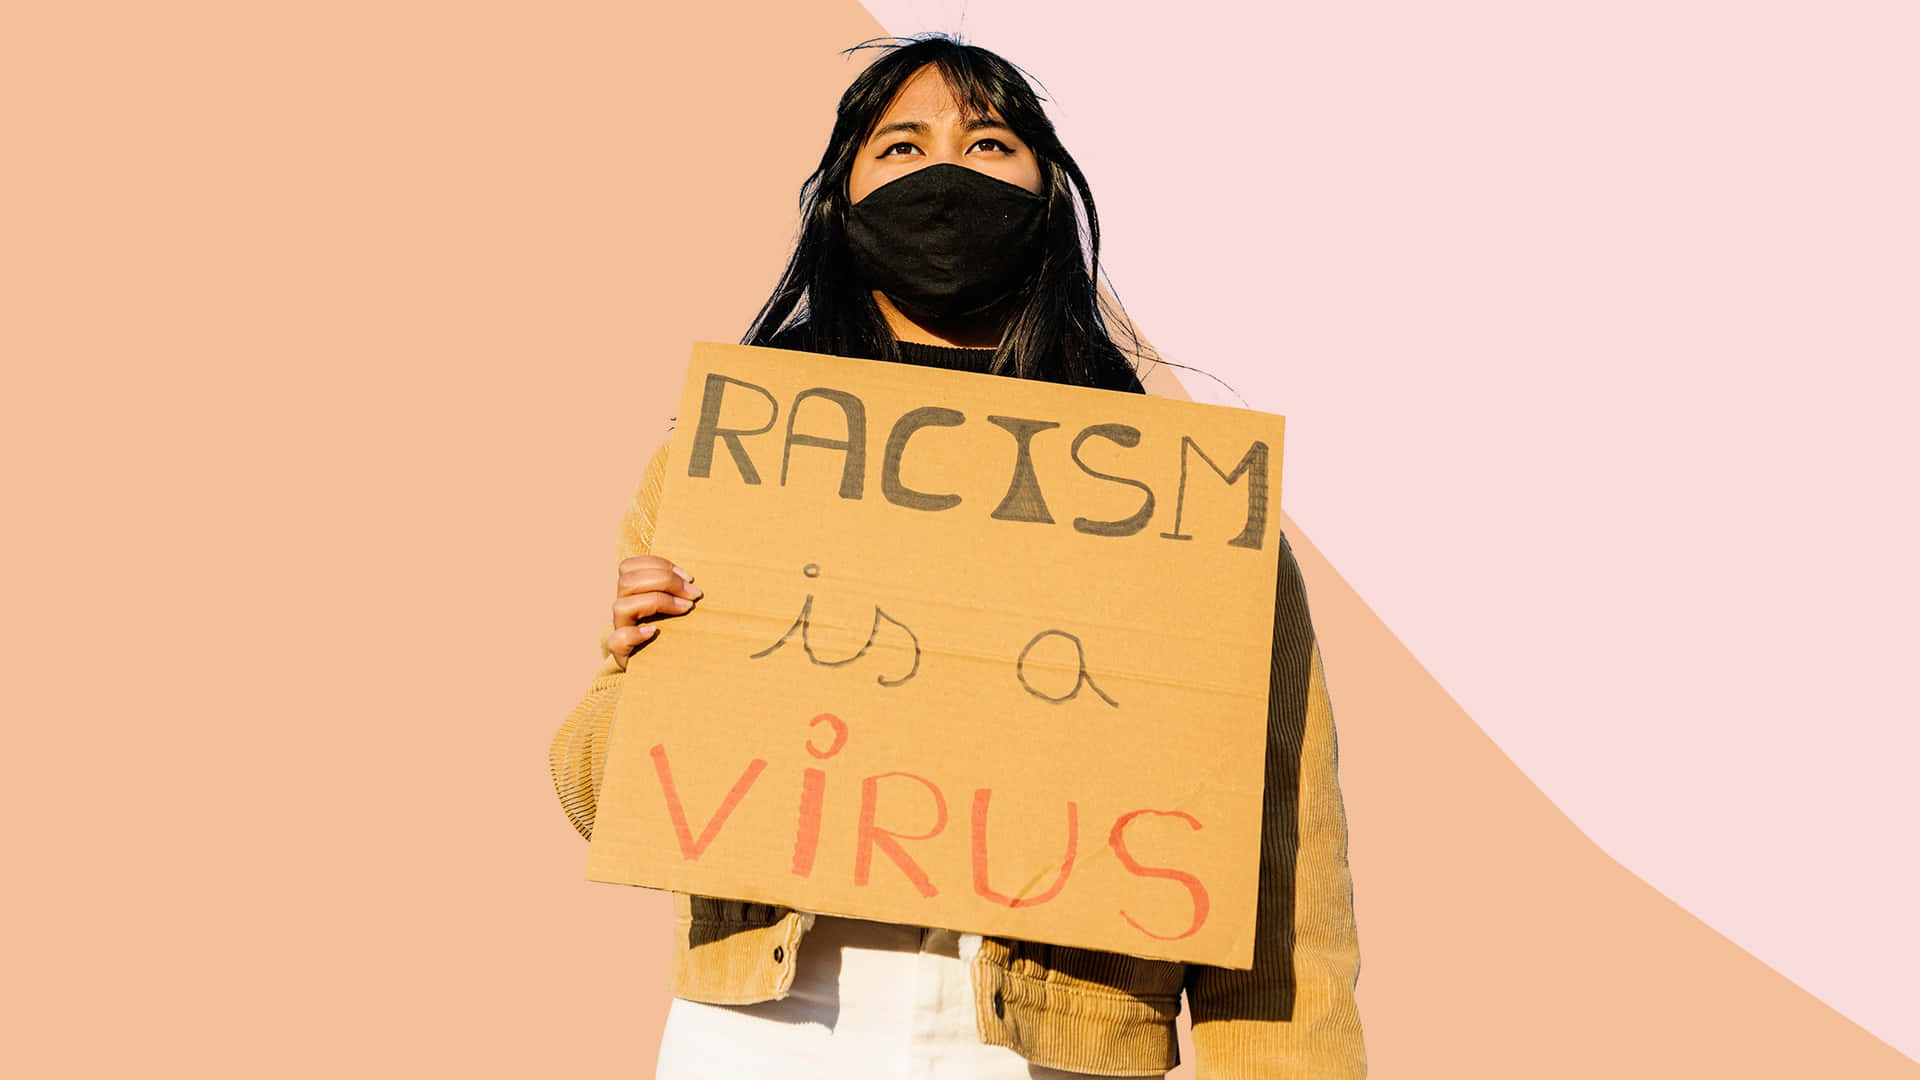 Racism Is A Virus Protest Sign Wallpaper